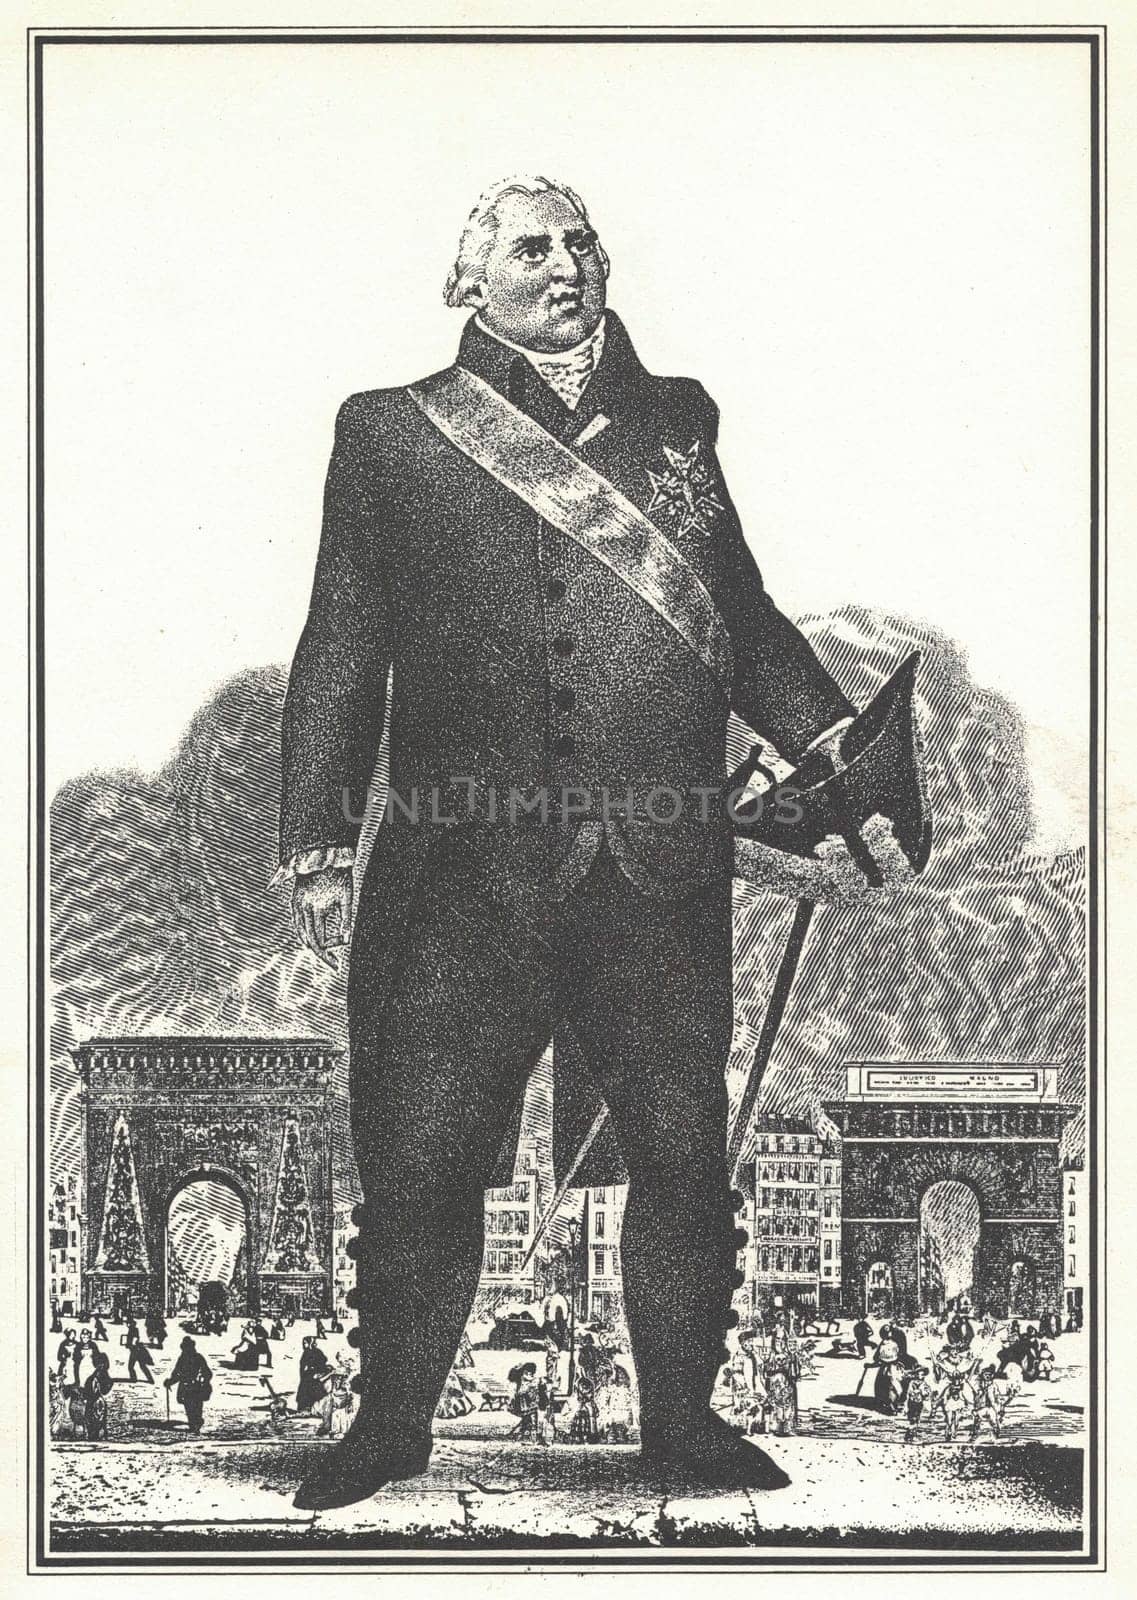 Louis XVIII of France. 1755-1824. King of France. Was King from 6th April 1814 to 20th March 1815. Antique illustration. by roman_nerud